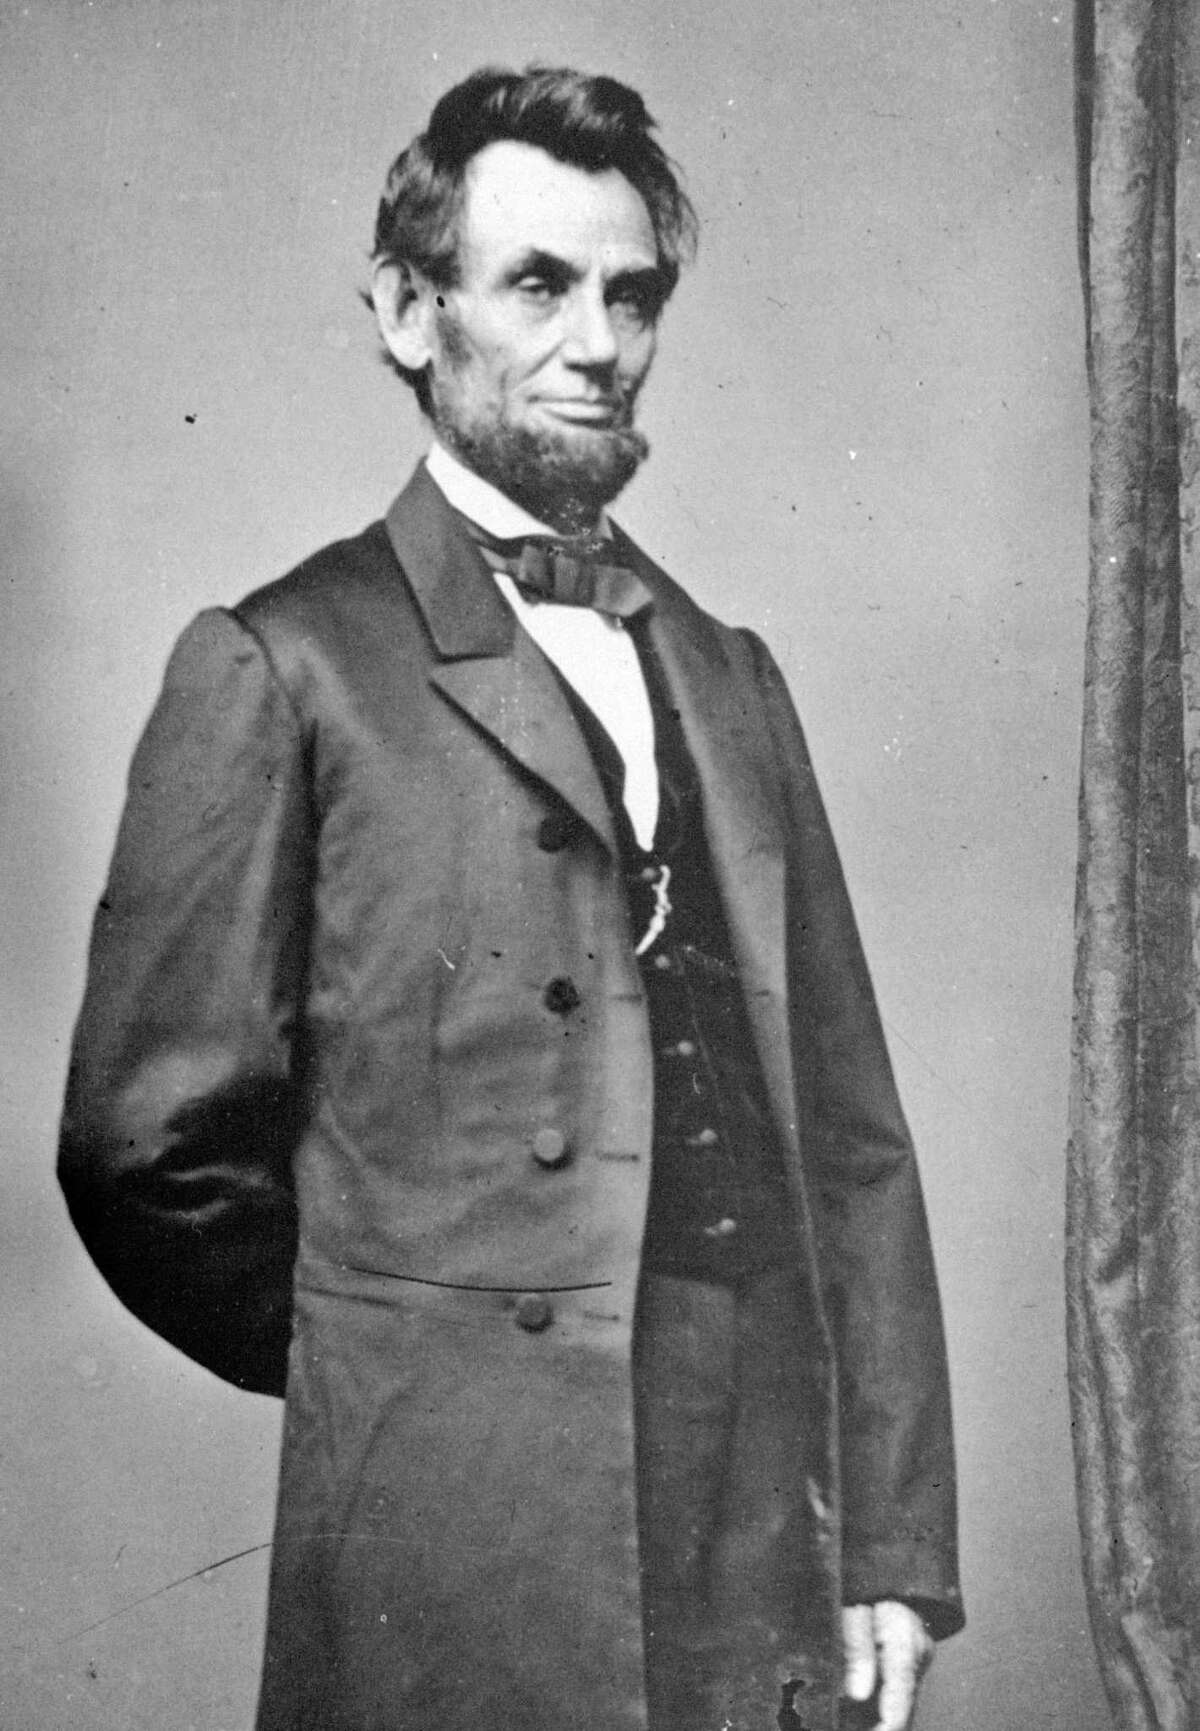 Abraham Lincoln understood he’d be the president of all Americans, not only those who’d voted for him. In his first inaugural address, he said, “We are not enemies, but friends. We must not be enemies. Though passion may have strained it must not break our bonds of affection.”